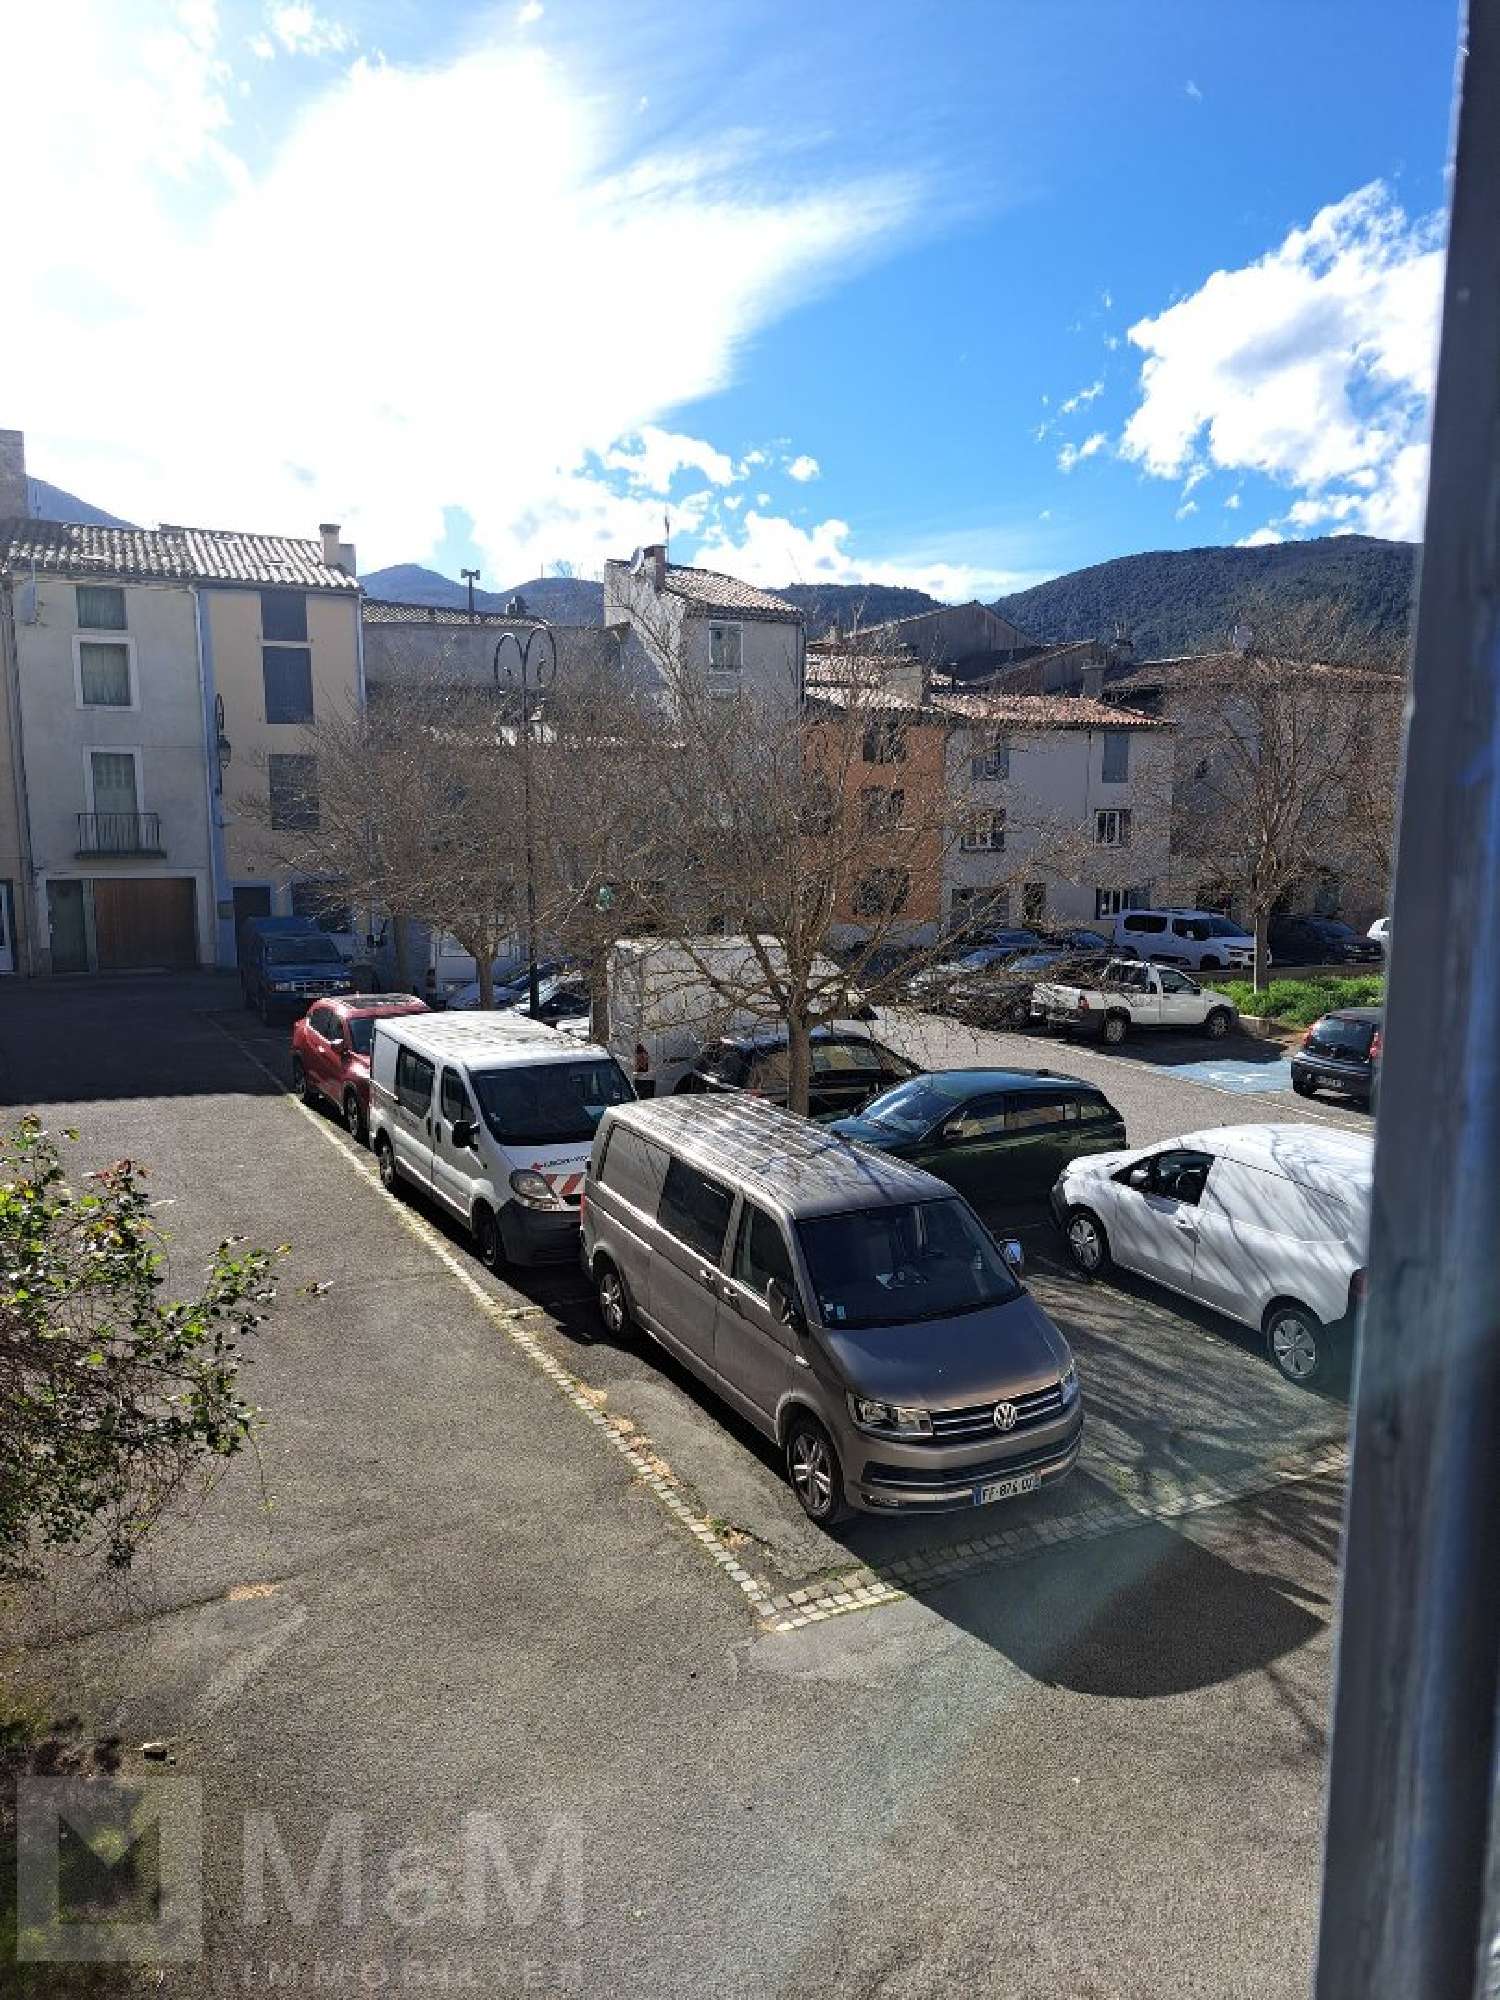  for sale house Quillan Aude 4